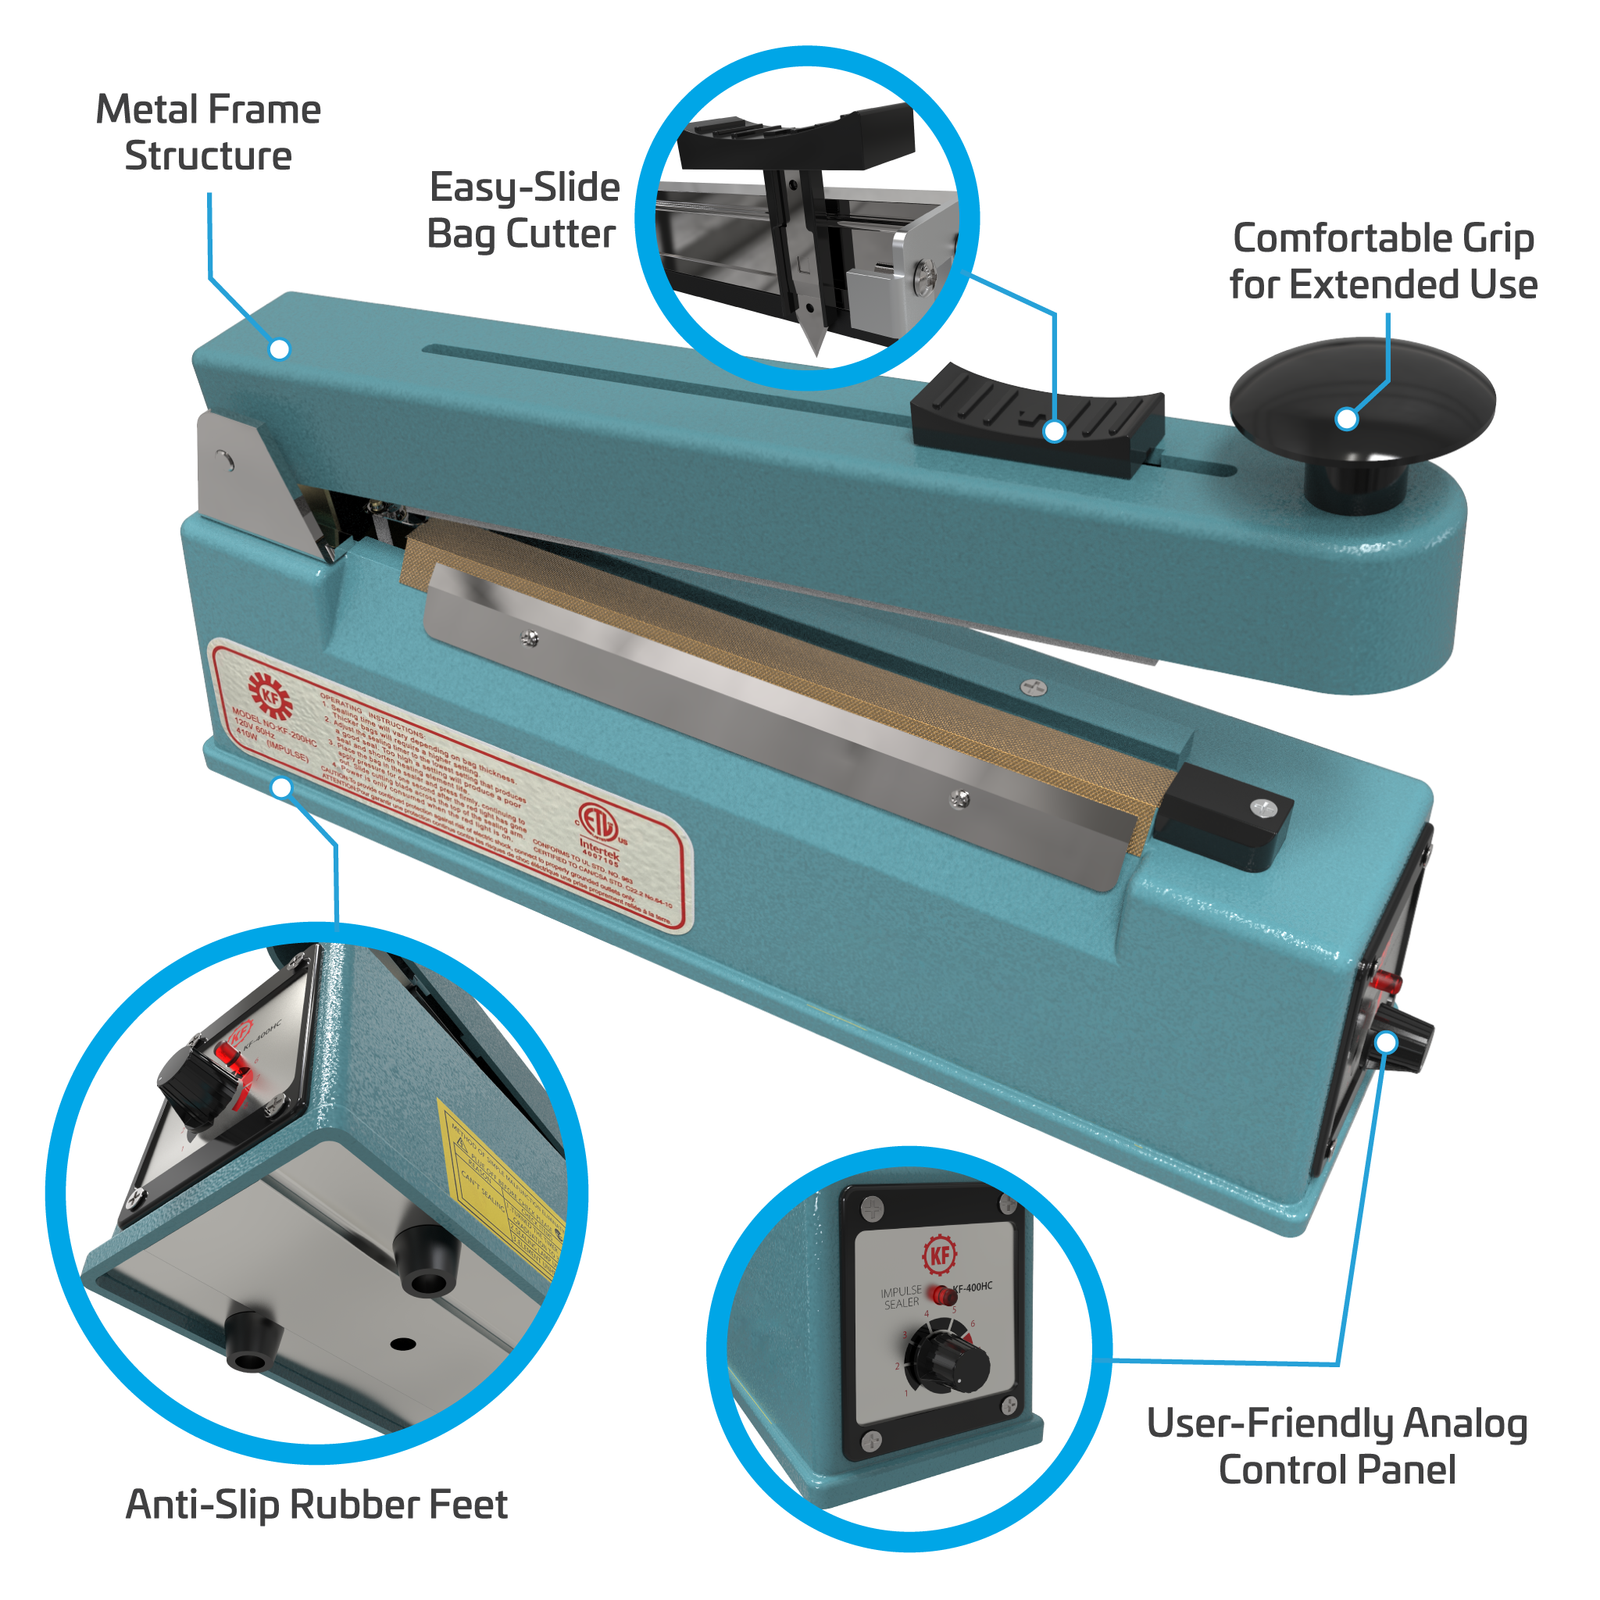 Blue manual impulse sealer over white background. Highlighted features include, Metal Frame Structure, Easy-slide bag cutter, Comfortable Grip for Extended Use, Anti-slip Rubber Feet, and User Friendly Analog Control Panel. Zoomed close-ups of rubber feet and control panel.